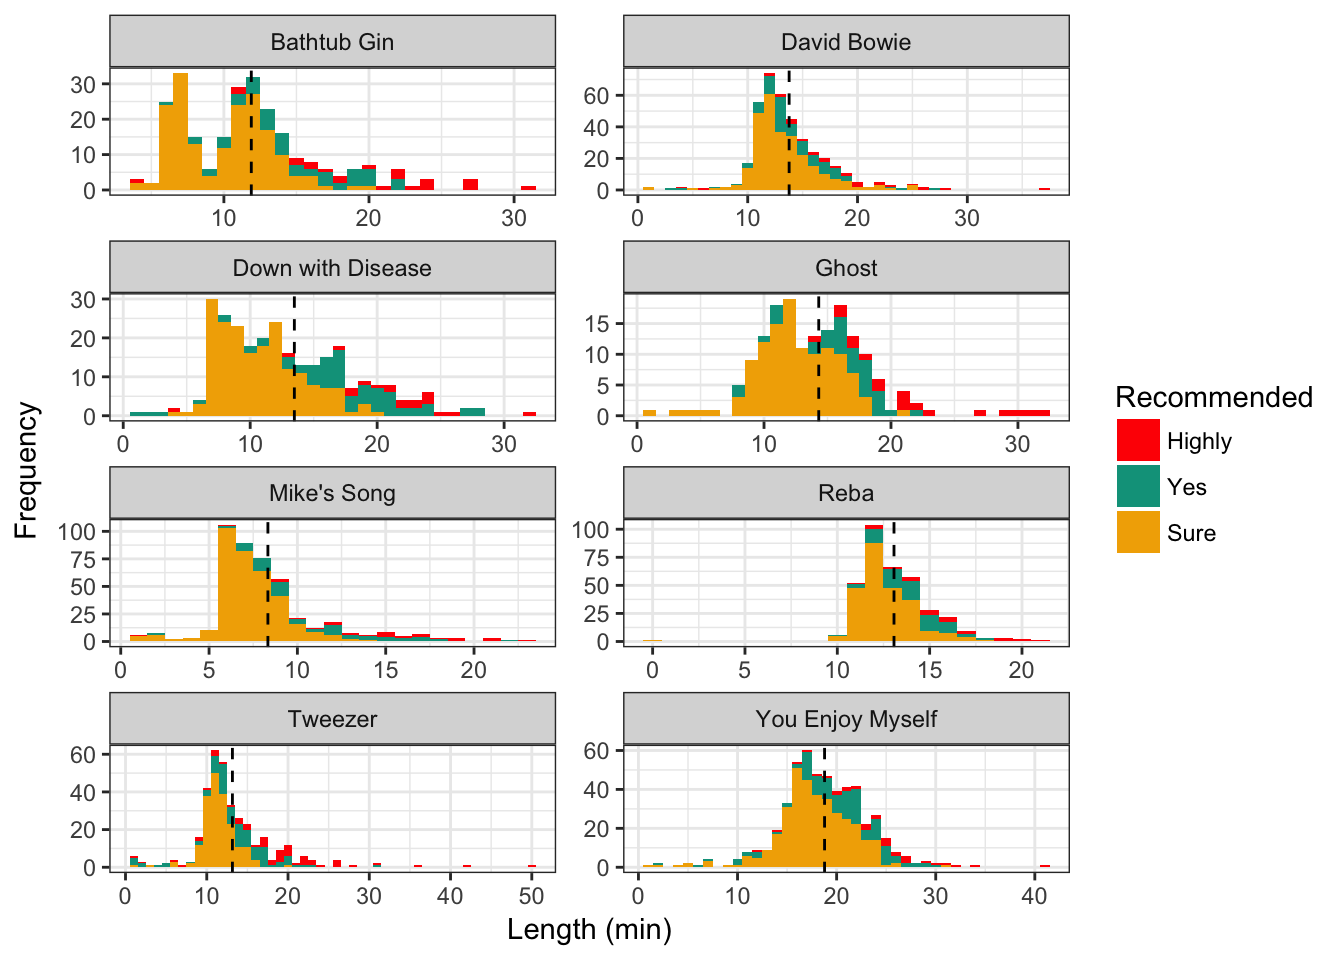 Distributions of performance length and recommendation level